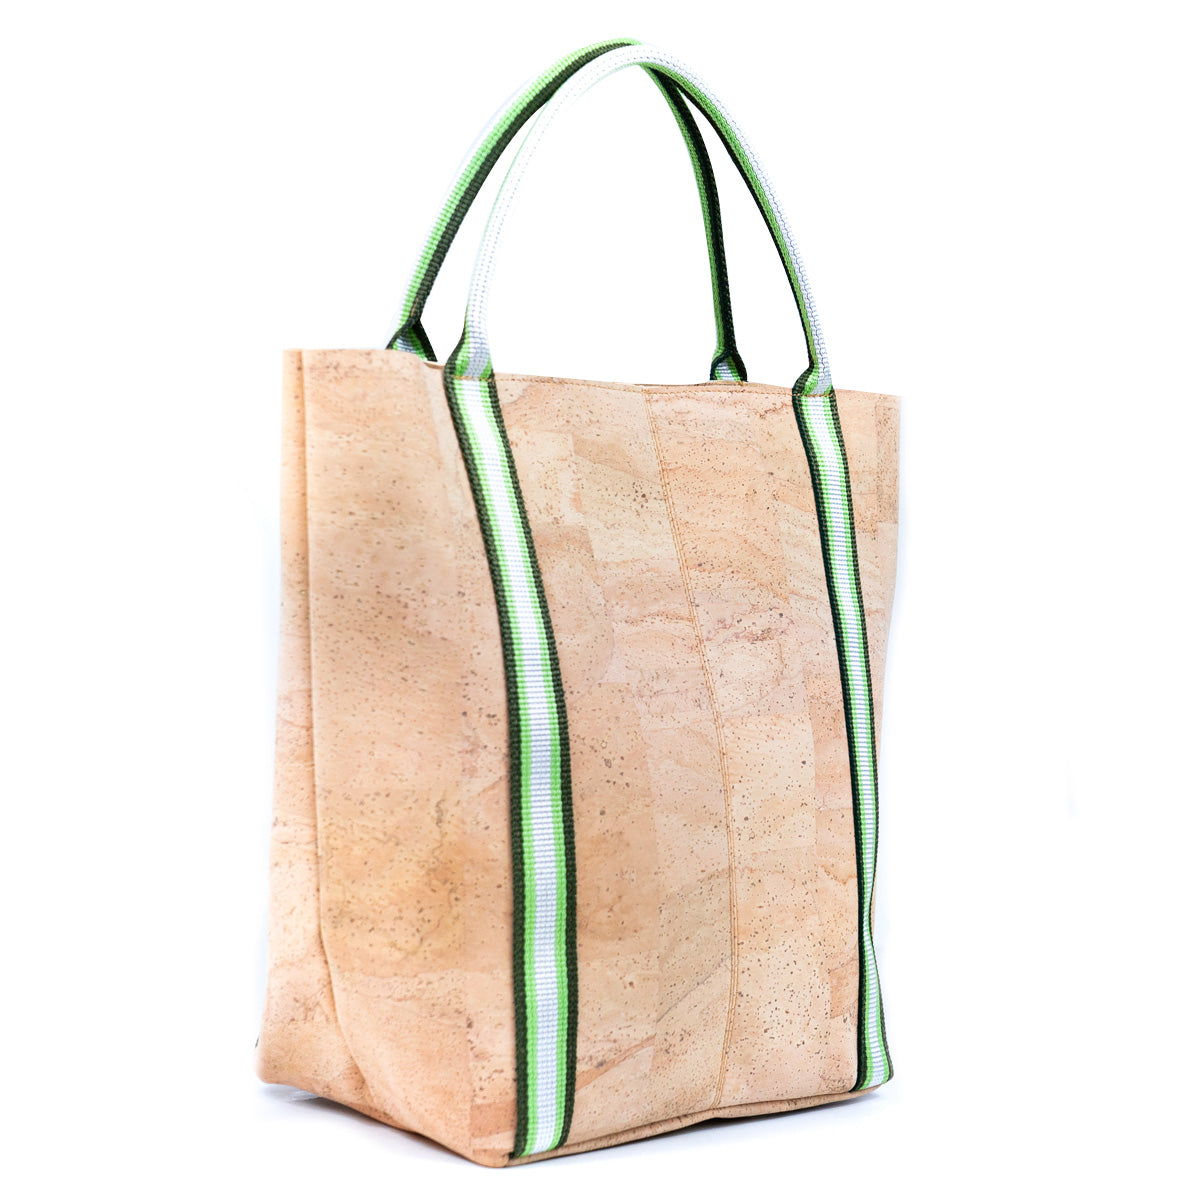 Minimalist Style Vegan Tote Bag w/ Natural Cork & Woven Strap | THE CORK COLLECTION